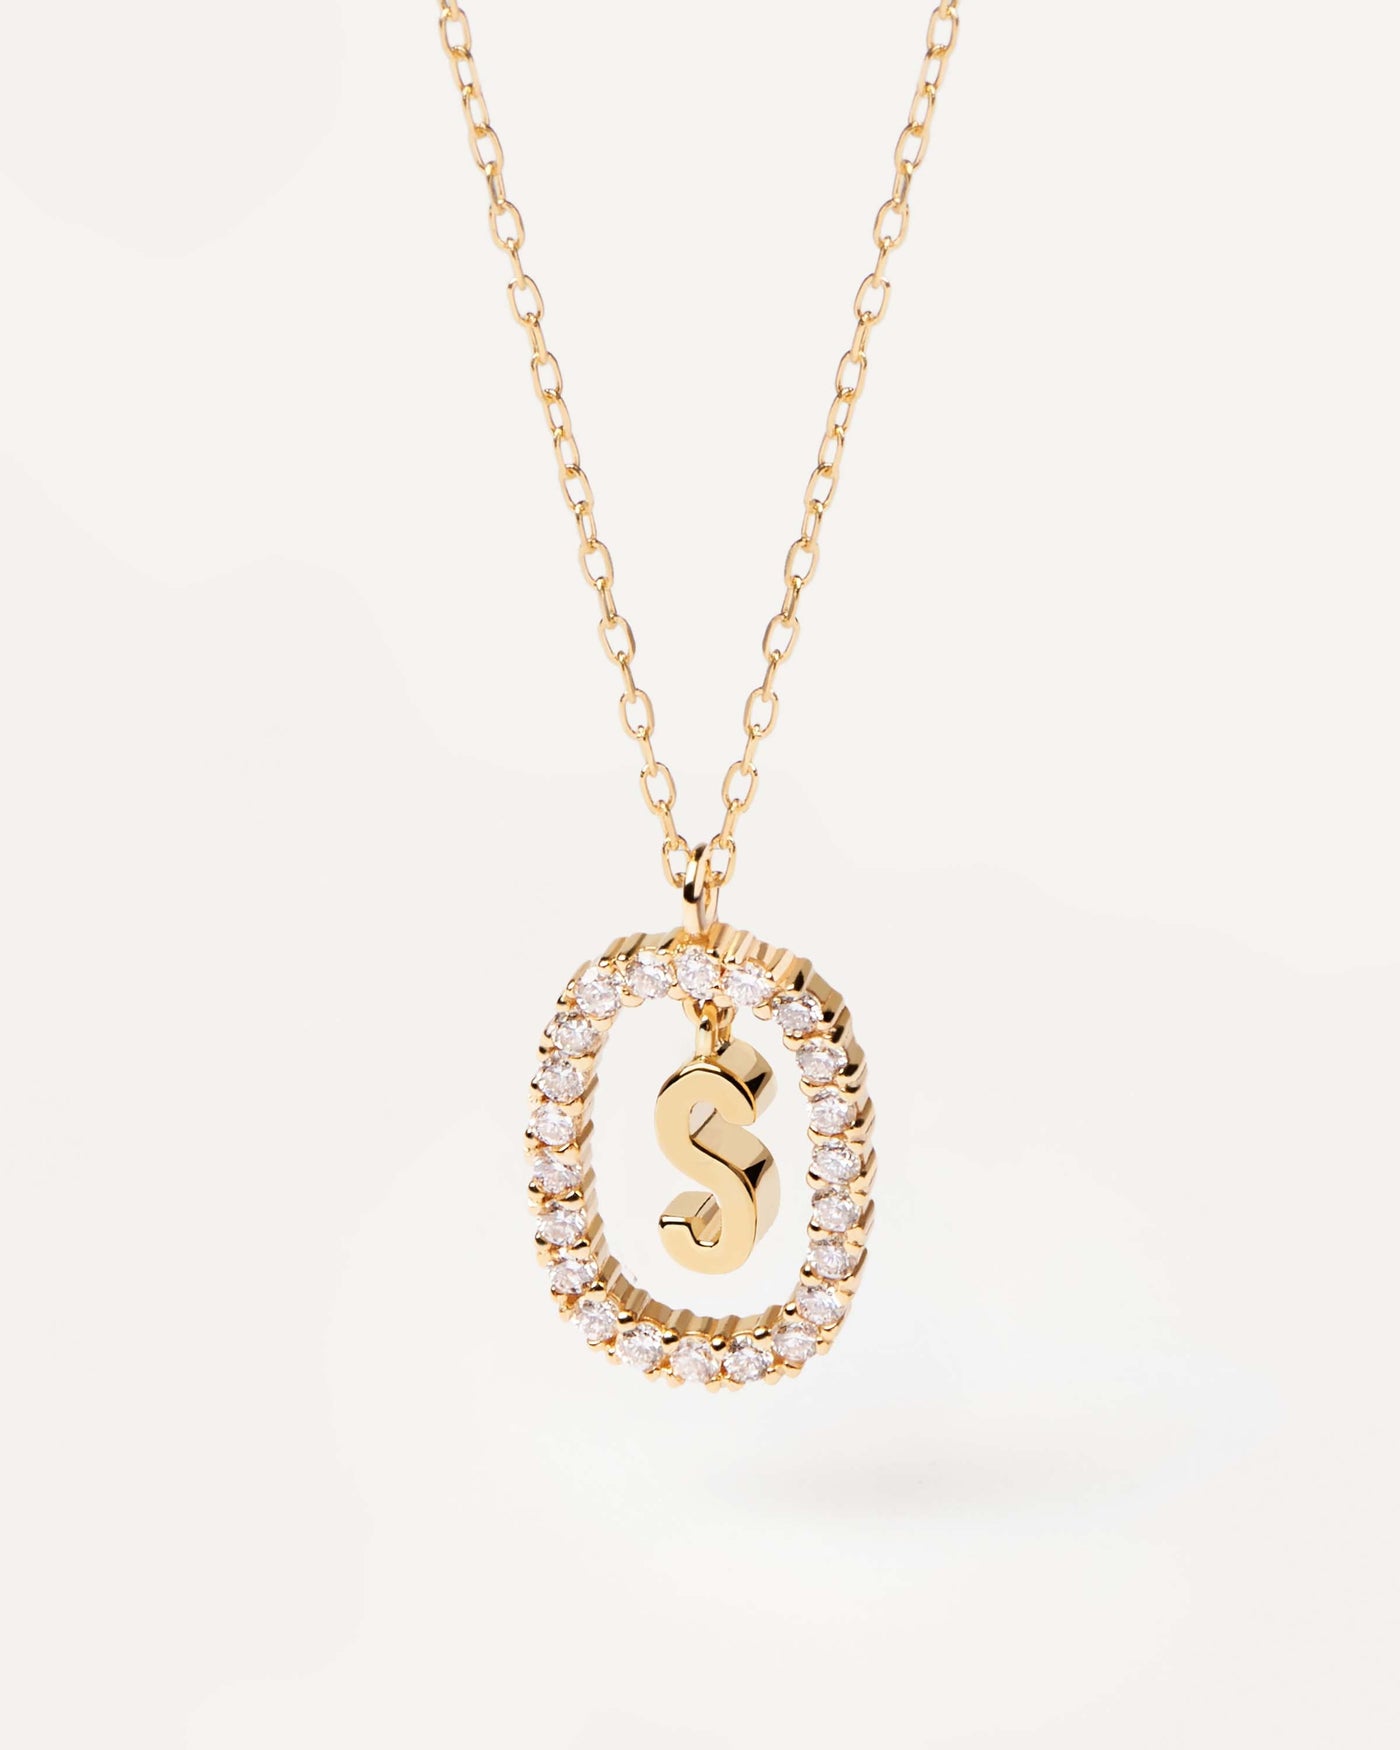 2023 Selection | Diamonds and Gold Letter S Necklace. Initial S necklace in solid yellow gold, circled by 0.33 carats lab-grown diamonds. Get the latest arrival from PDPAOLA. Place your order safely and get this Best Seller. Free Shipping.